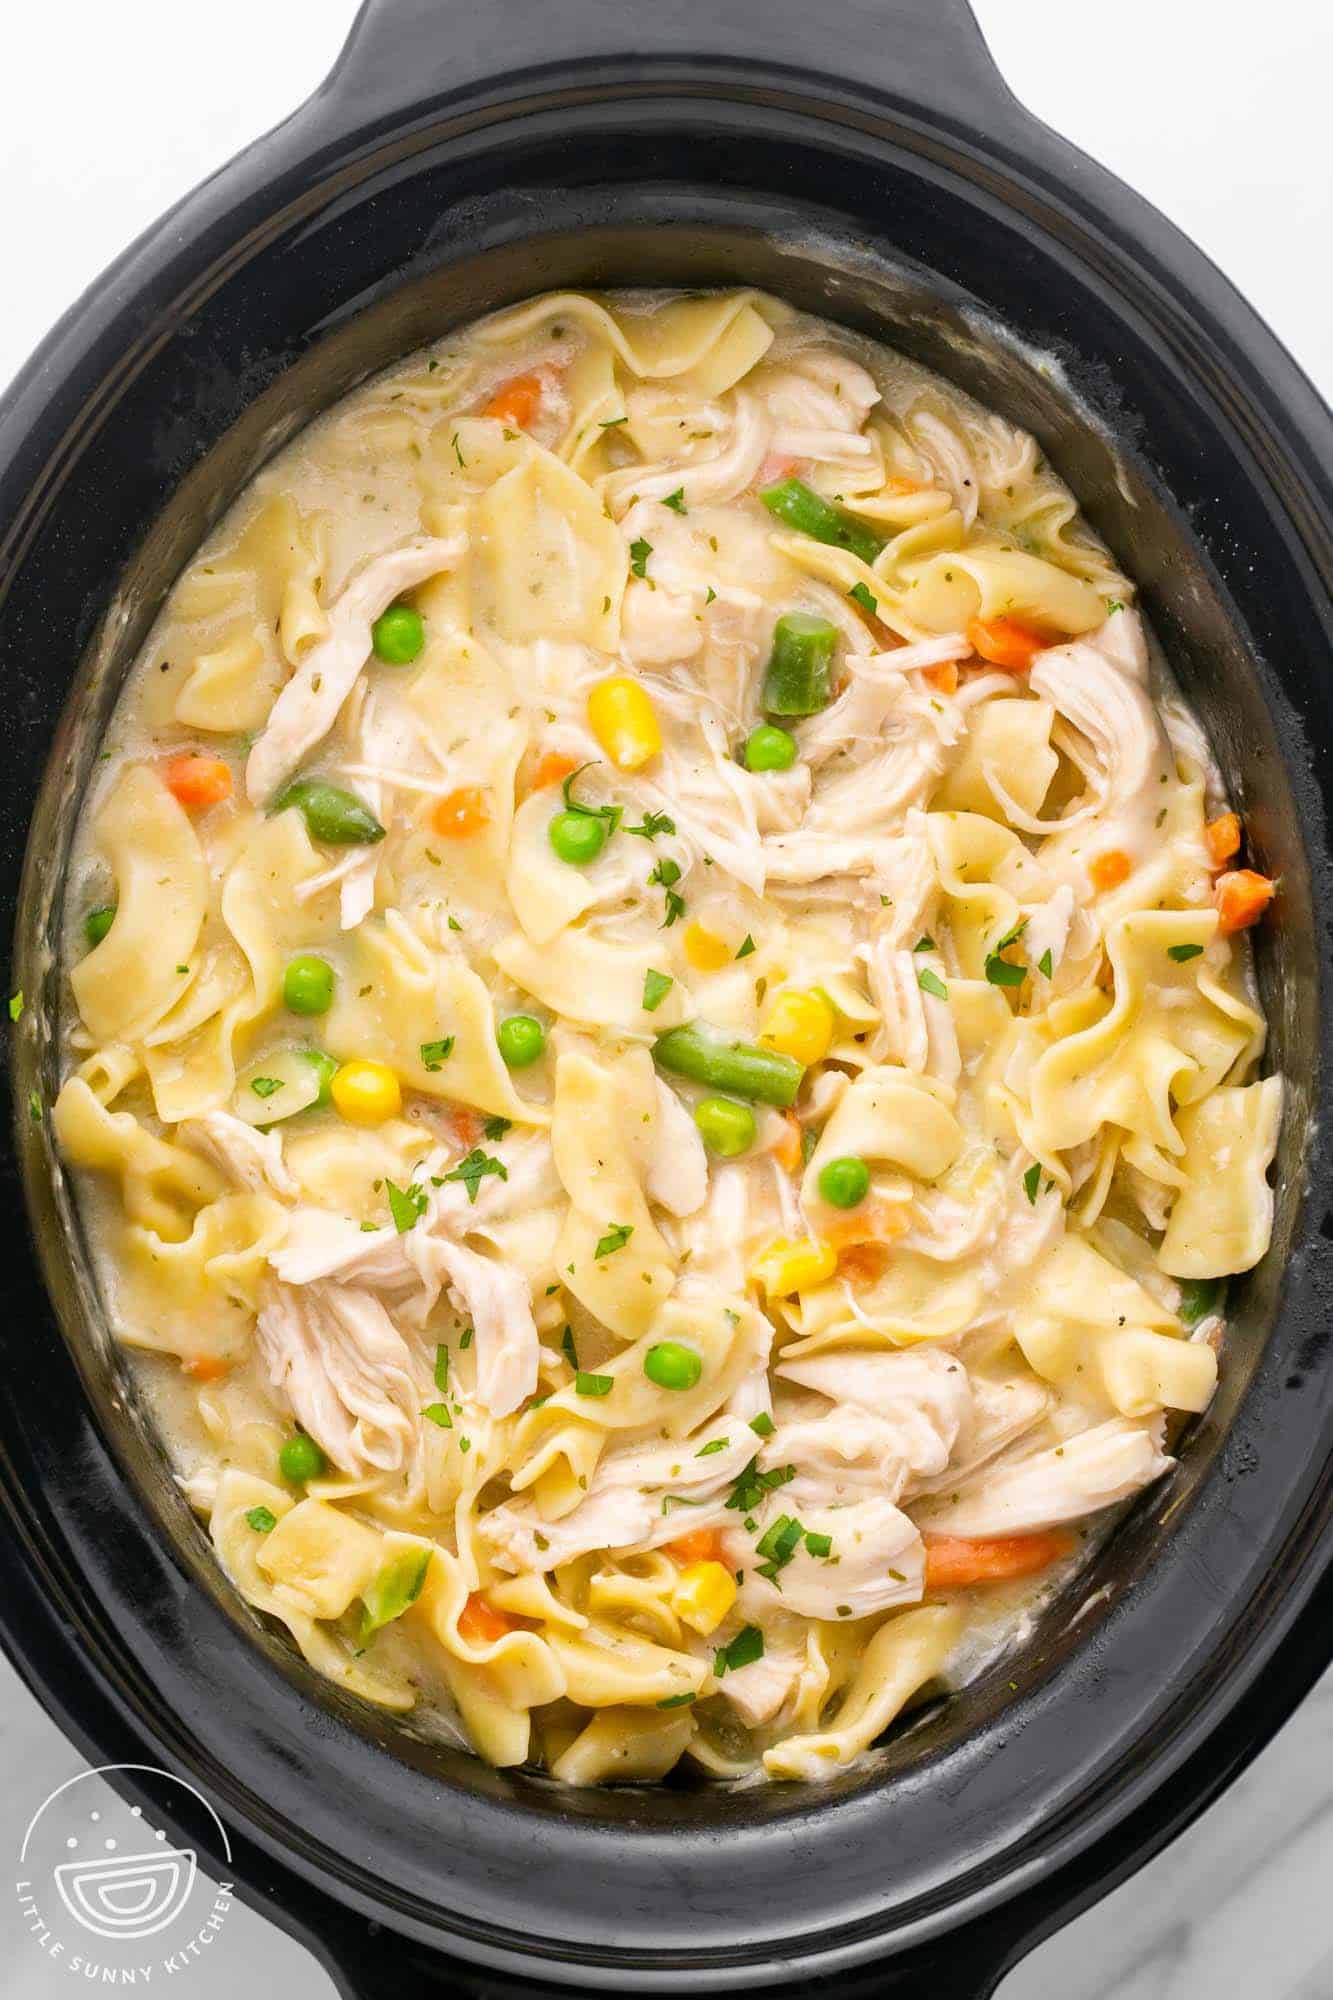 A black crockpot filled with creamy noodles with mixed veggies and shredded chicken. Viewed from overhead.